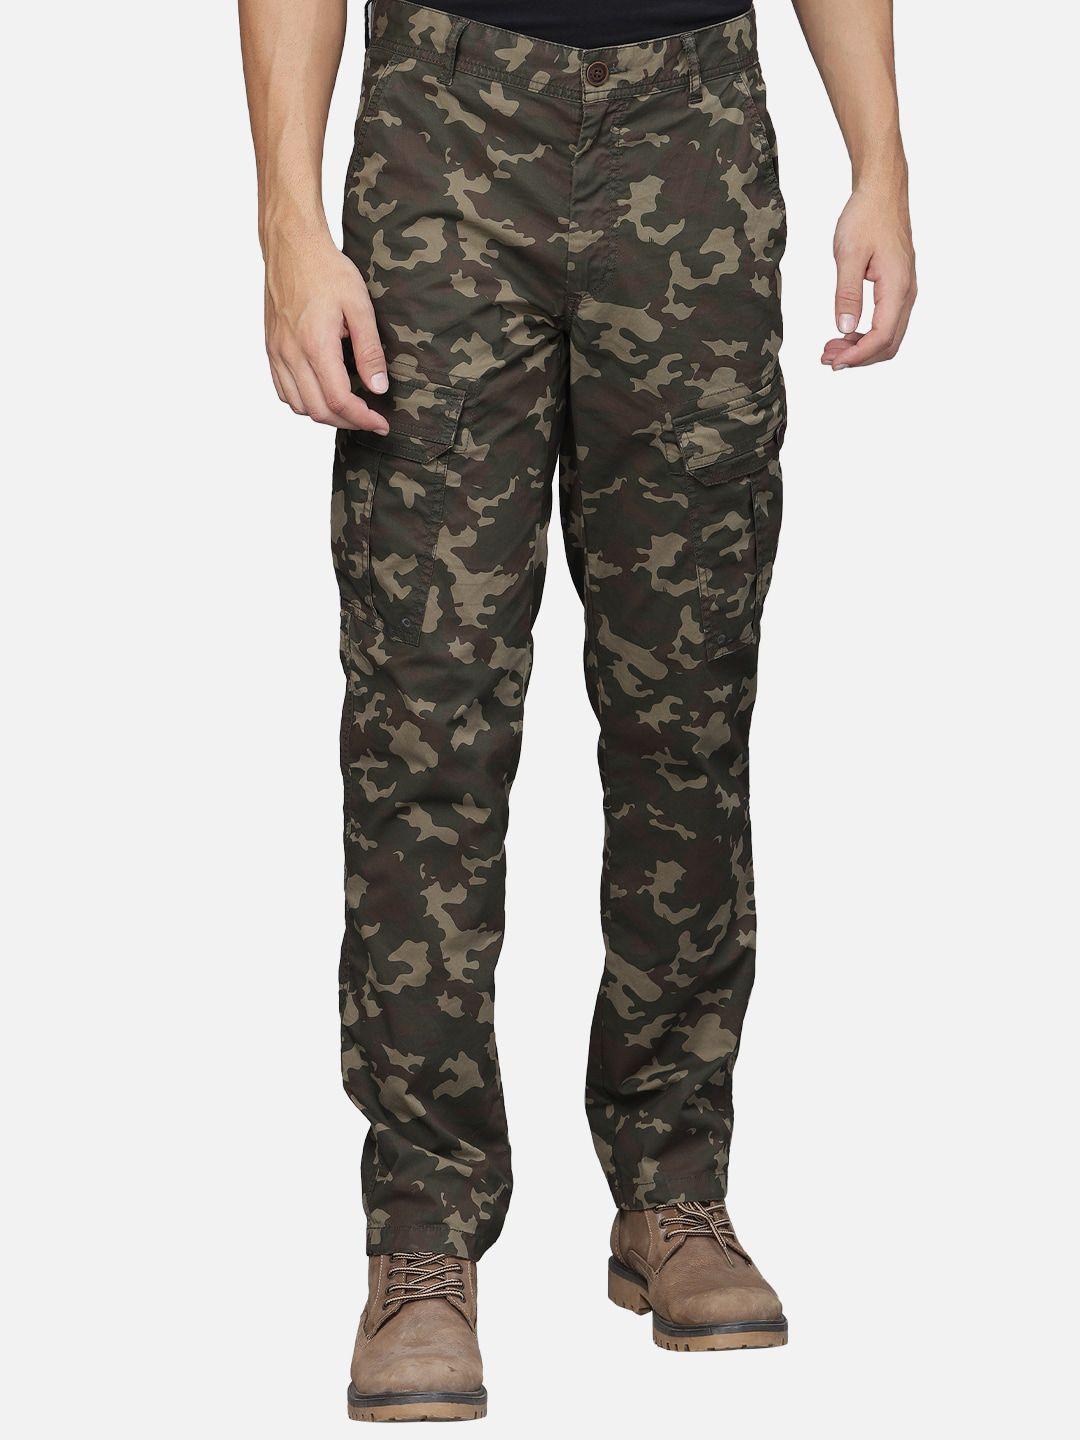 t-base men olive green camouflage printed cargos trousers